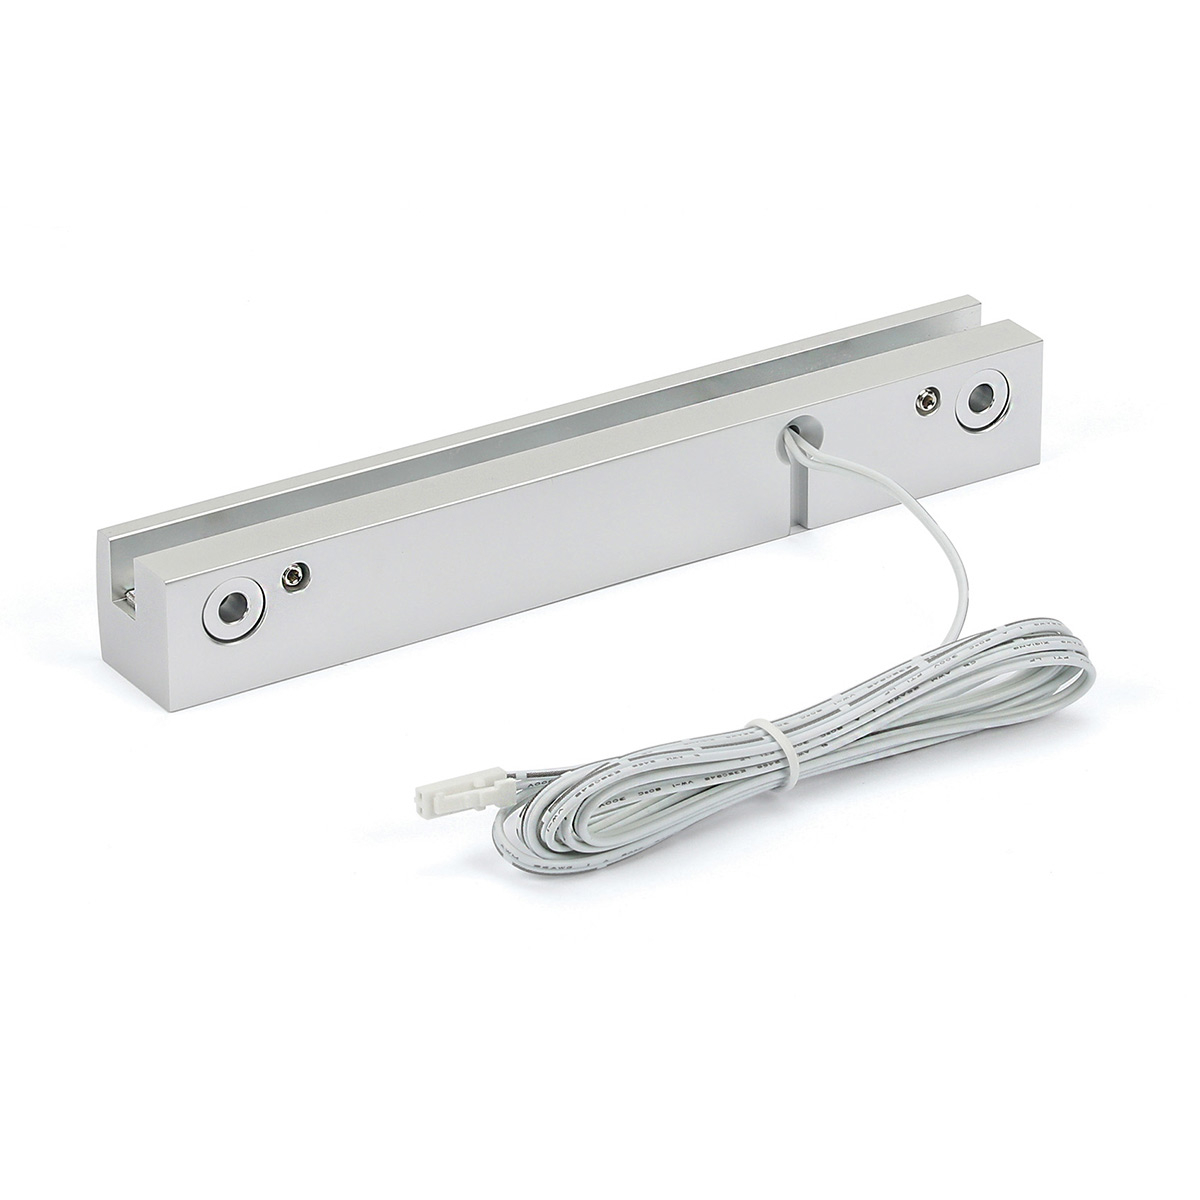 BLUE LED Sign Clamp in 7 1/16'' (180 mm length X 1'' (25.4 mm) Silver satin aluminum finish.Mount Kit Supports Signs Up To 5/16'' Thick, Wall Mount, Low Voltage transformer included.